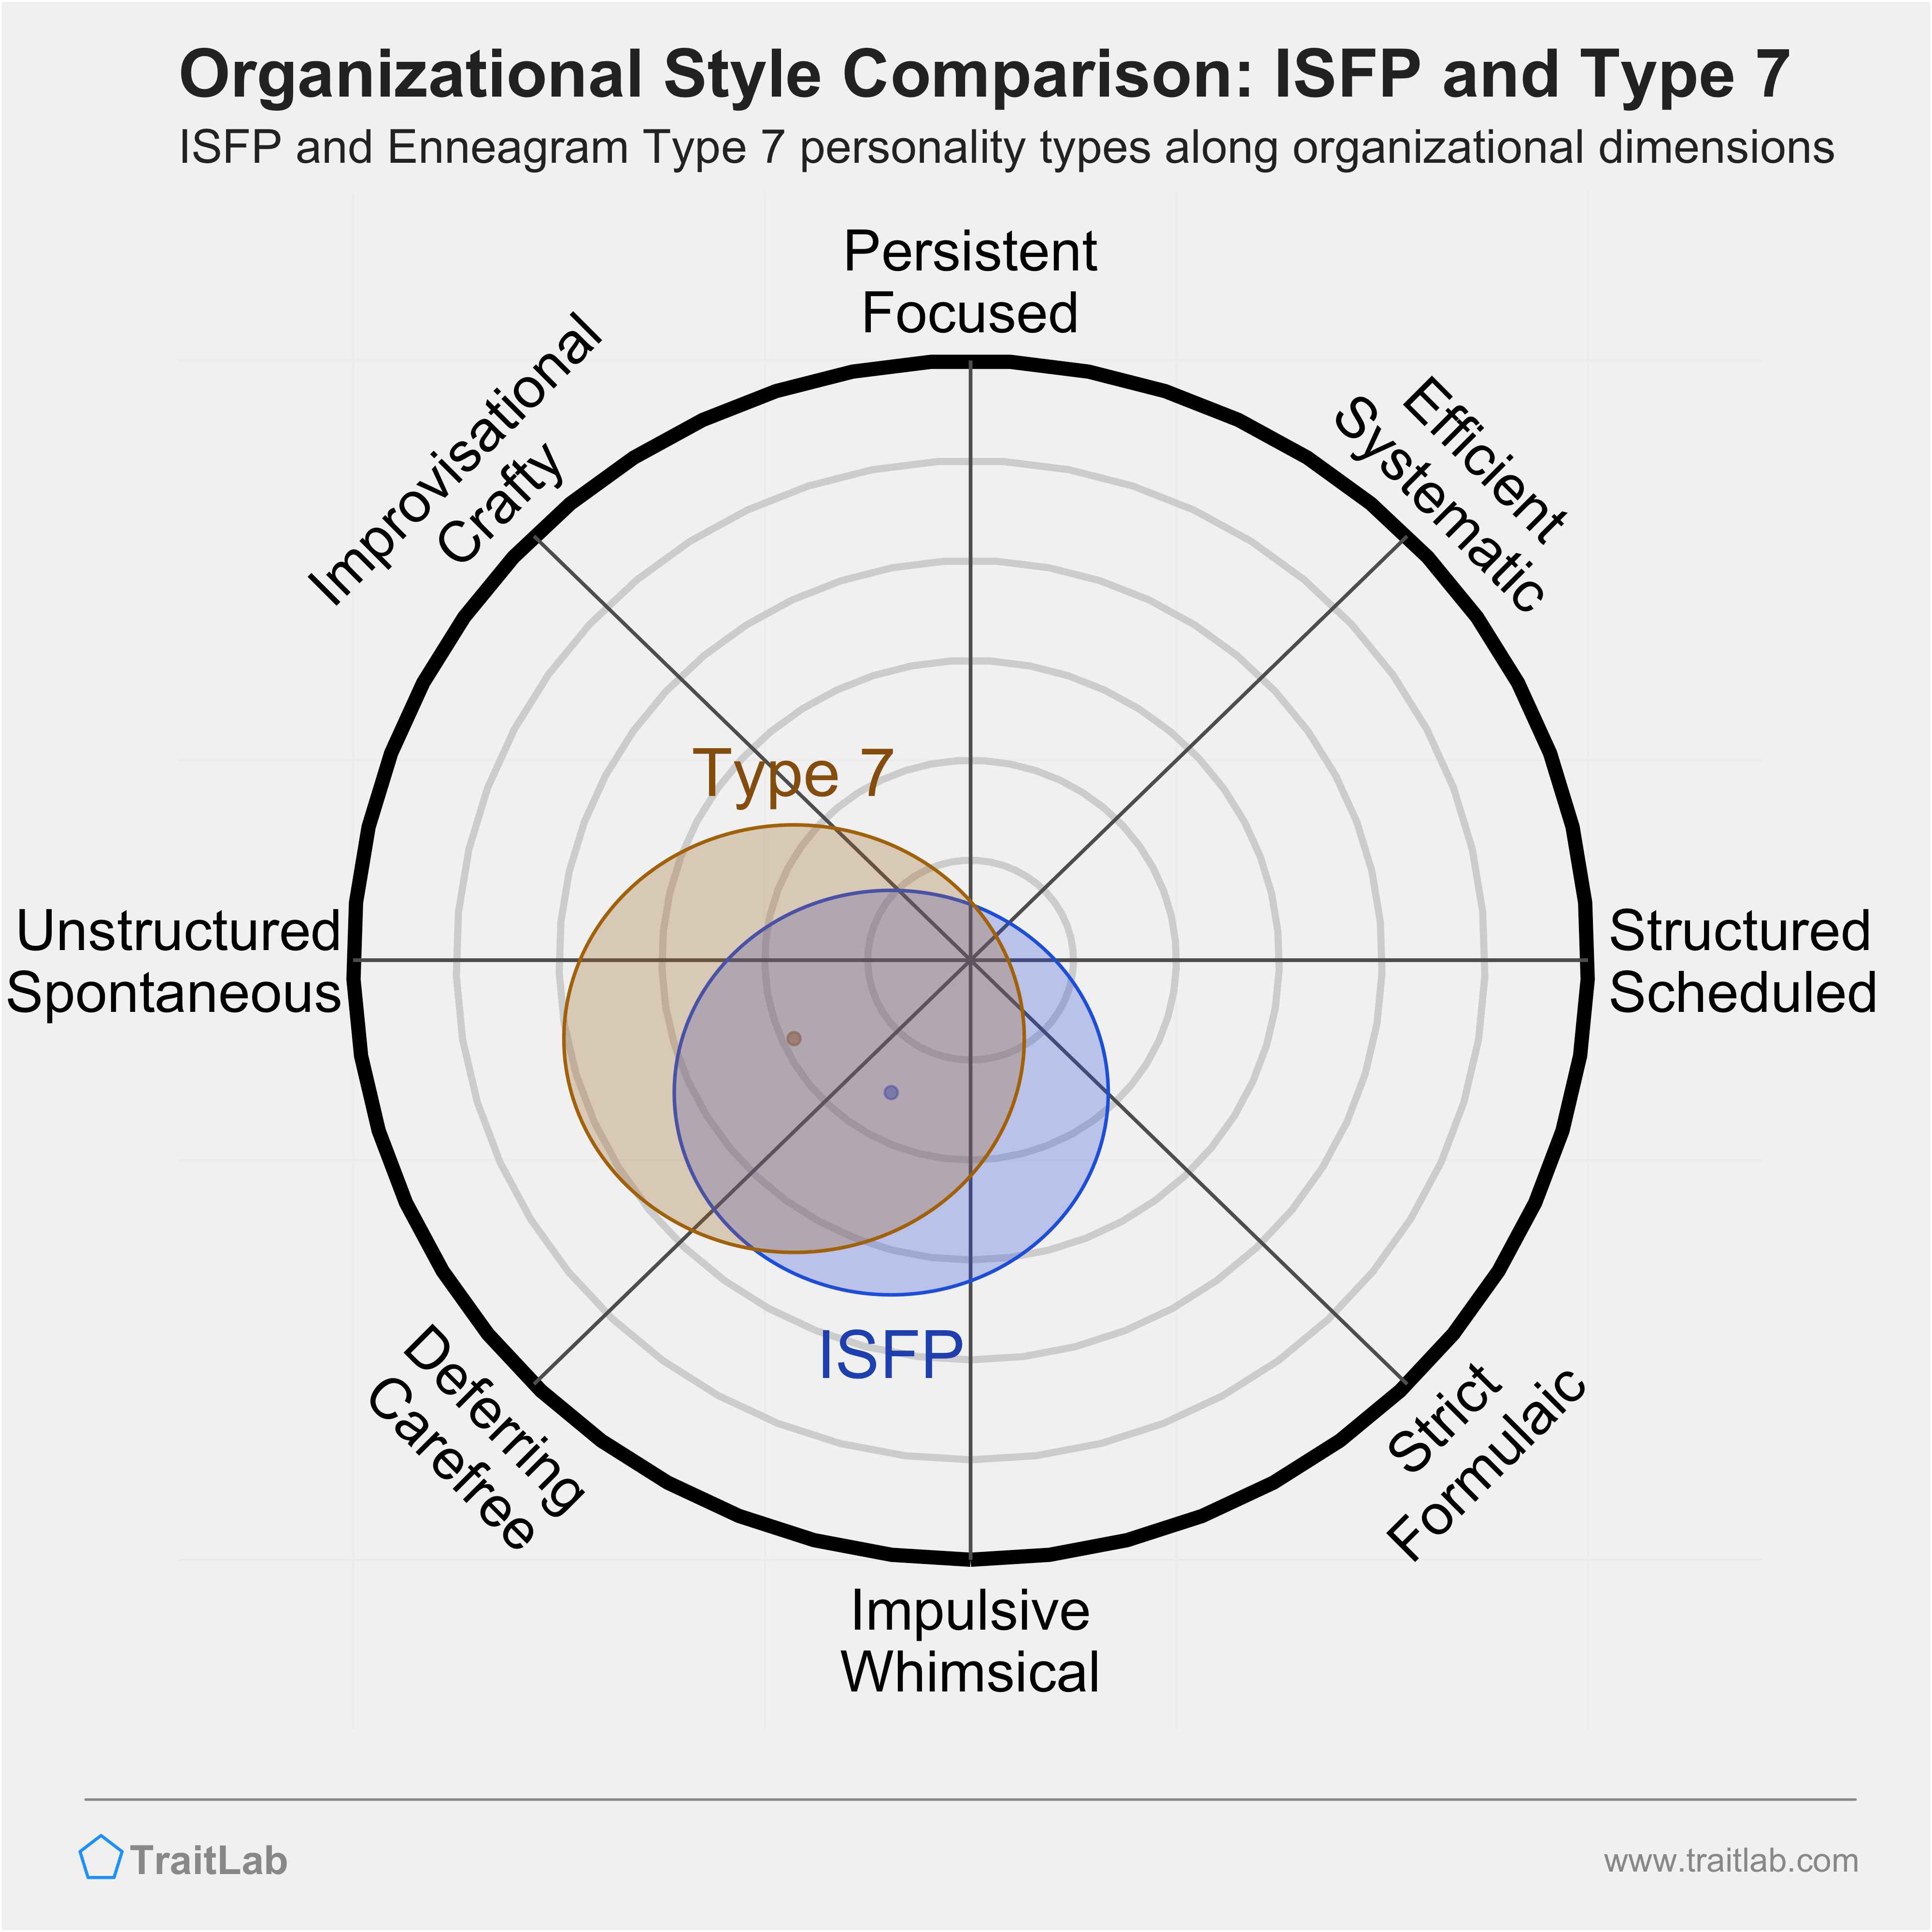 ISFP and Type 7 comparison across organizational dimensions